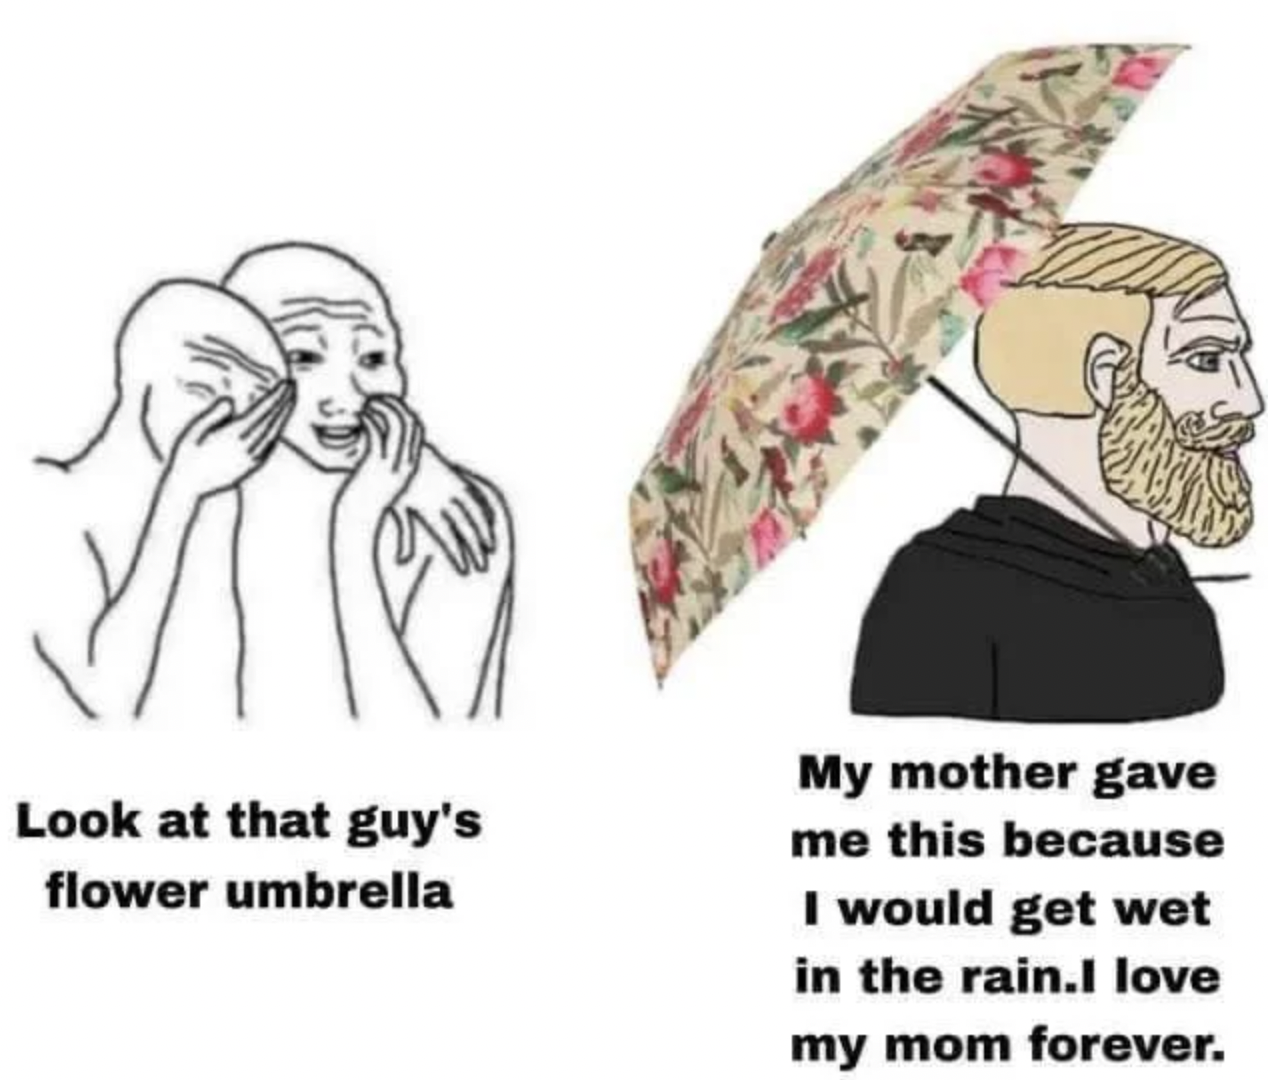 my mother gave me this umbrella - Look at that guy's flower umbrella My mother gave me this because I would get wet in the rain.I love my mom forever.